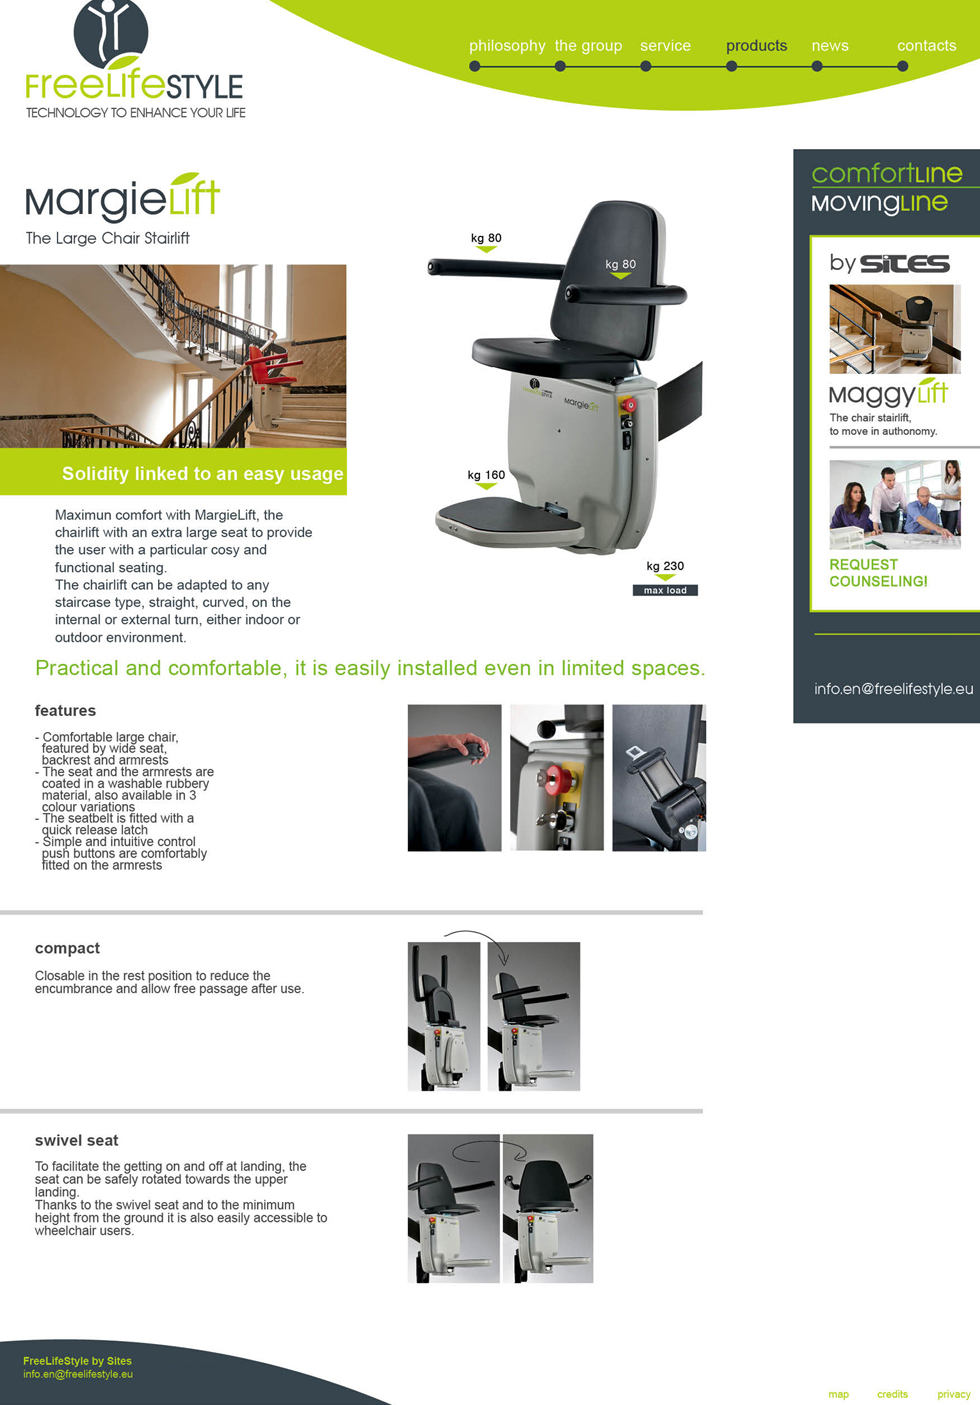 Margie Lift, the chair stairlift